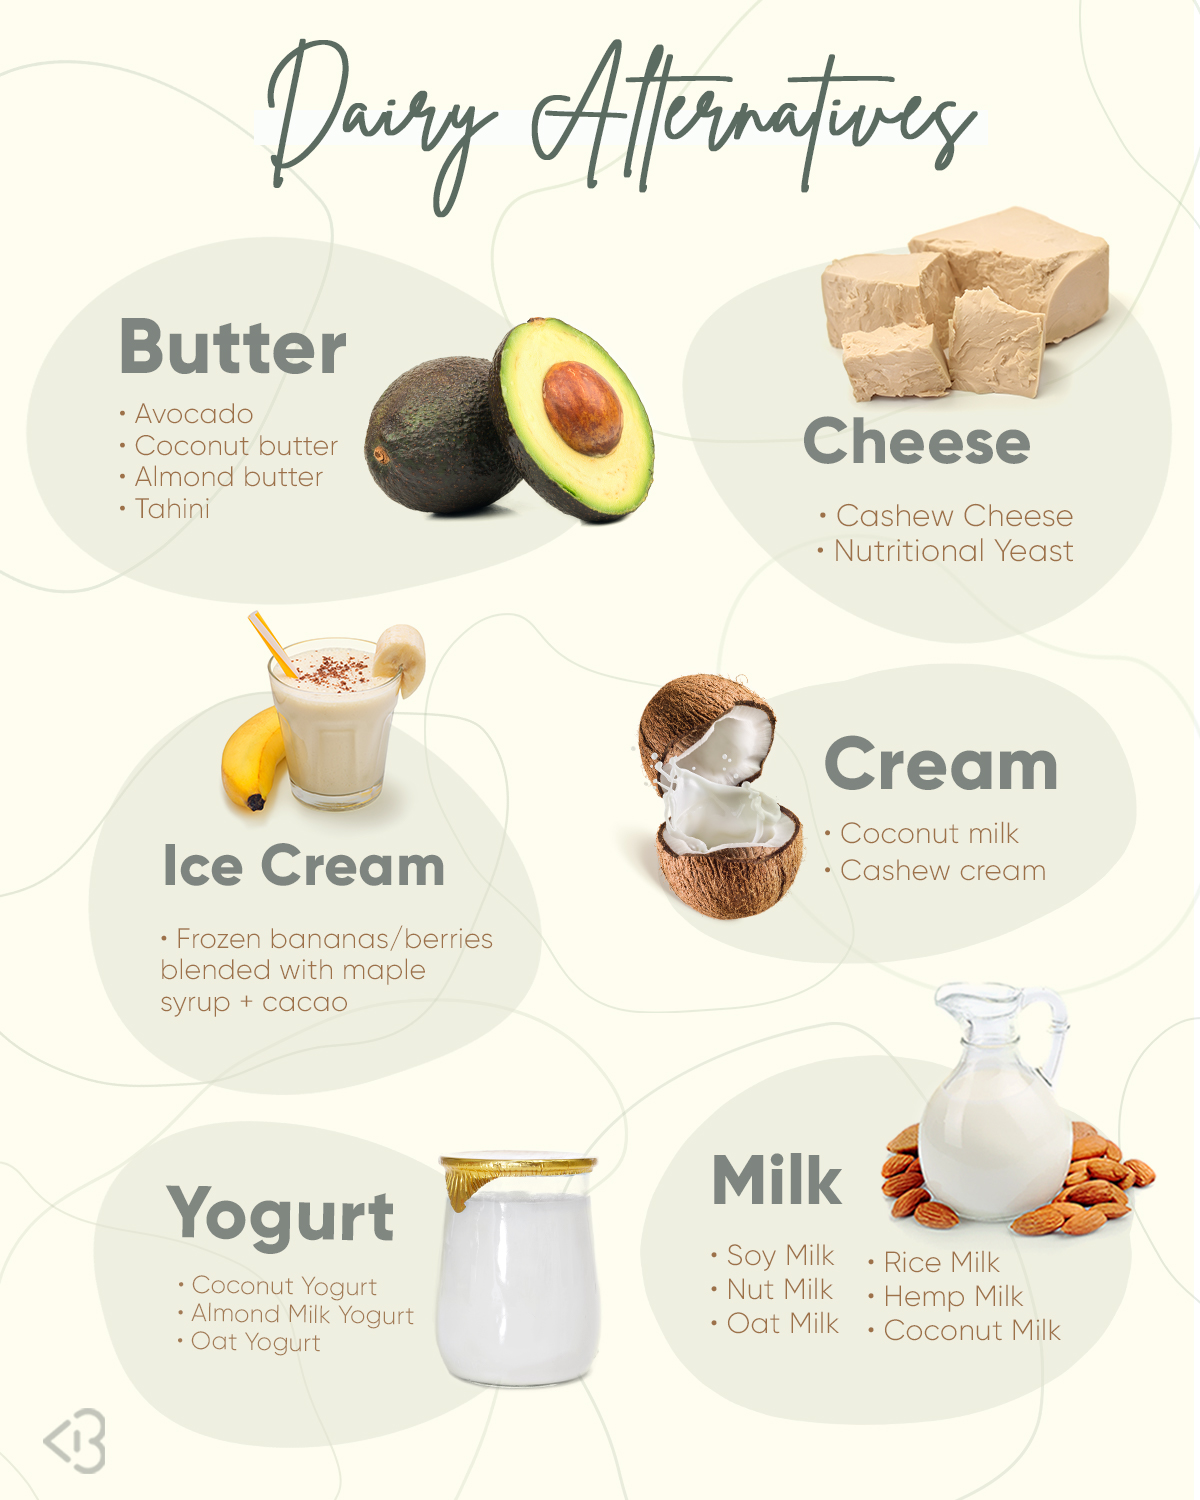 graphic with dairy alternatives for butter cheese ice cream cream yogurt and milk